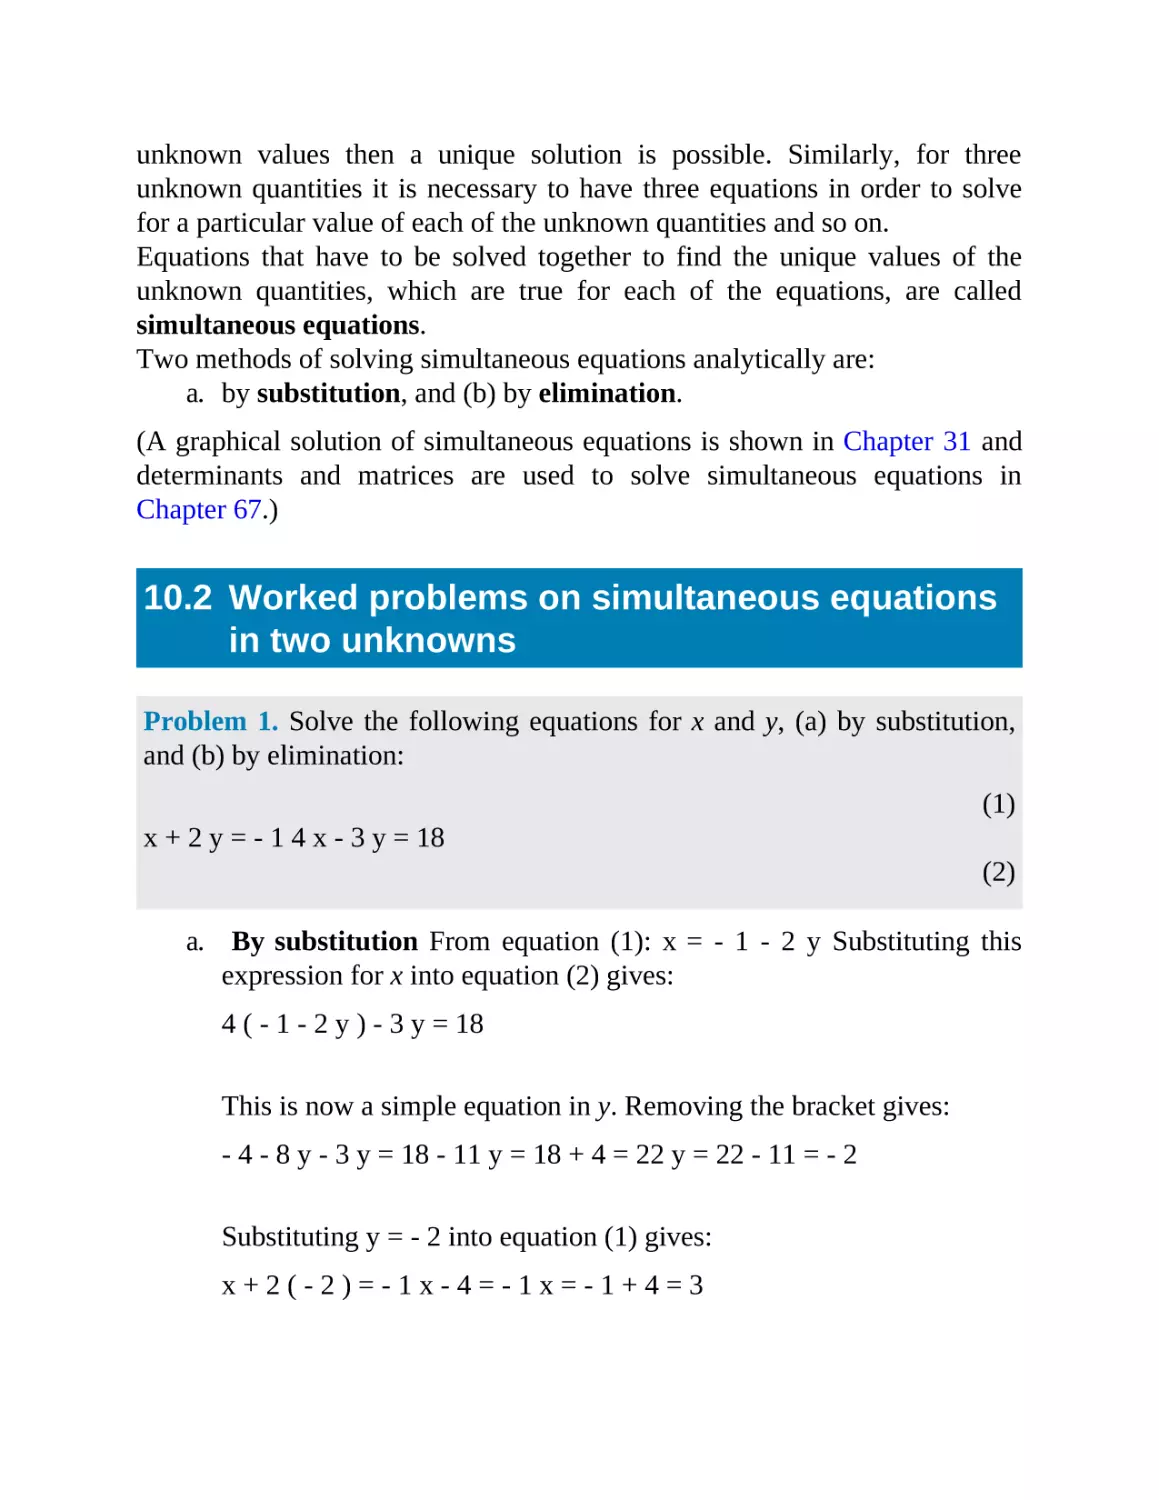 10.2 Worked problems on simultaneous equations in two unknowns